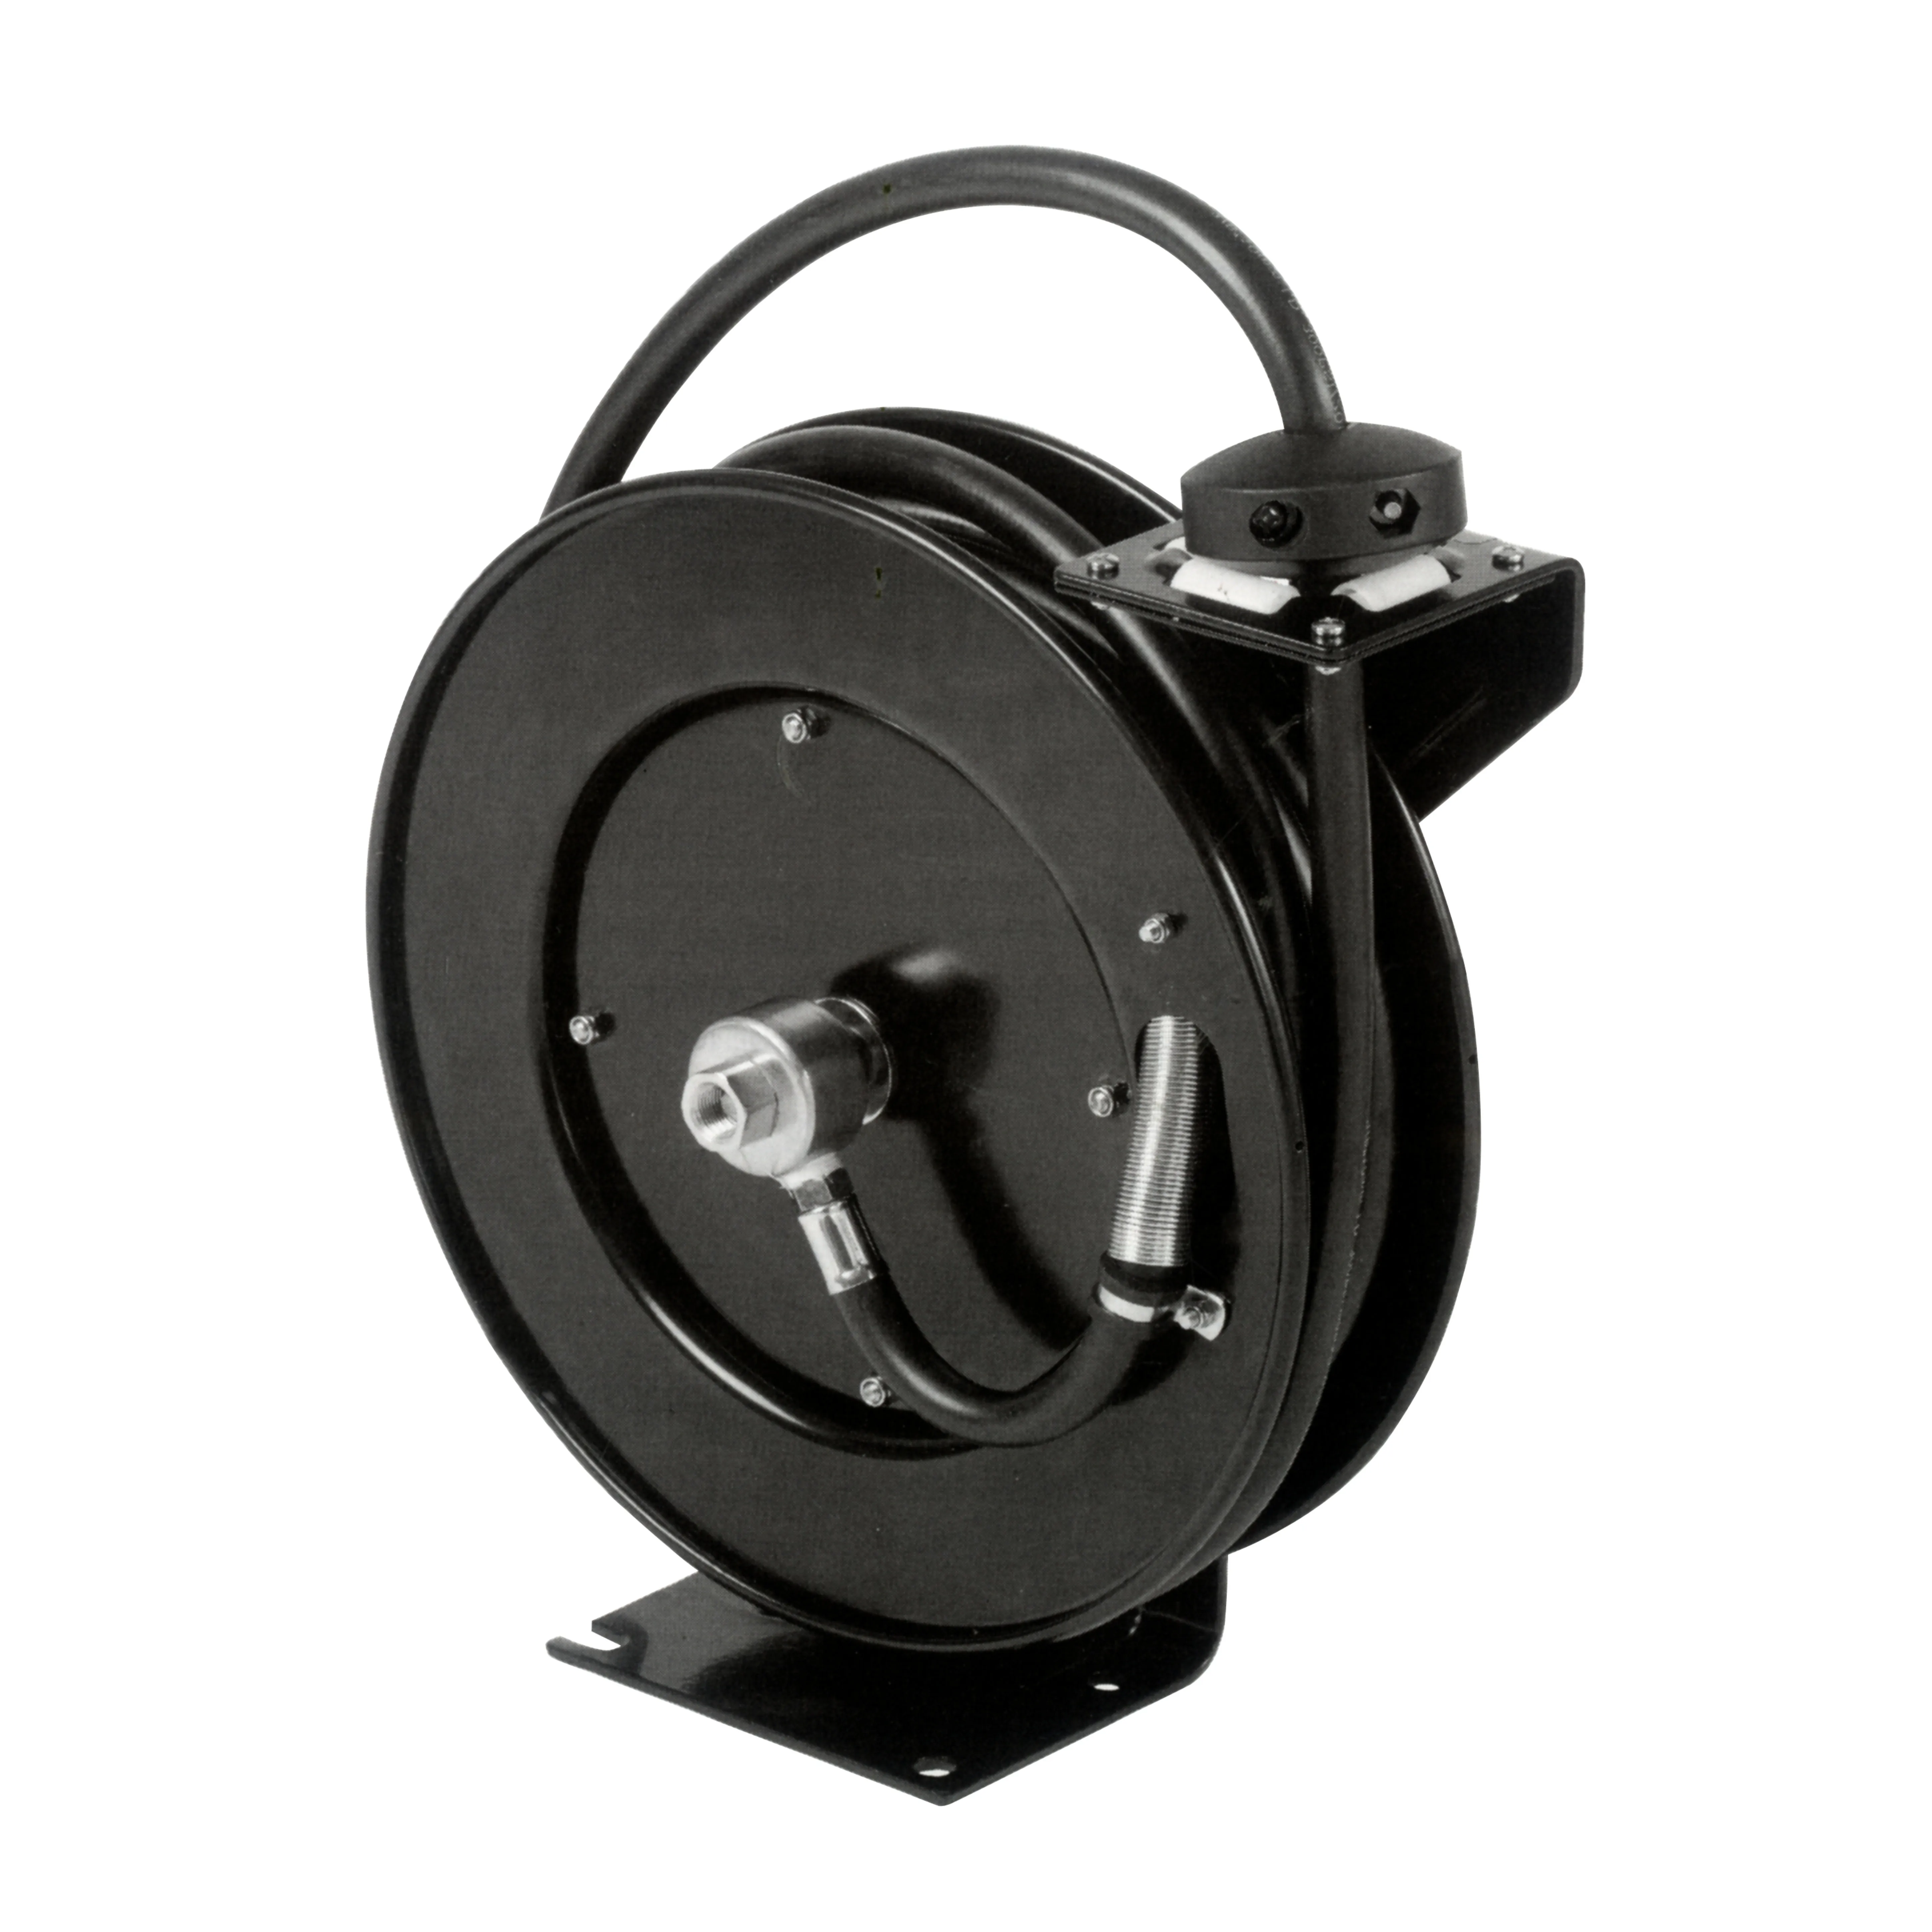 2023 Economic M98E-HRS11 11M Open Epoxy Coated Steel Retractable Hose Reel Water Hose Reel for Ground Washing trumsense xkc y28a 5v touchless water level sensor capacitive liquid height sensor for small hose of smart appliance normal open